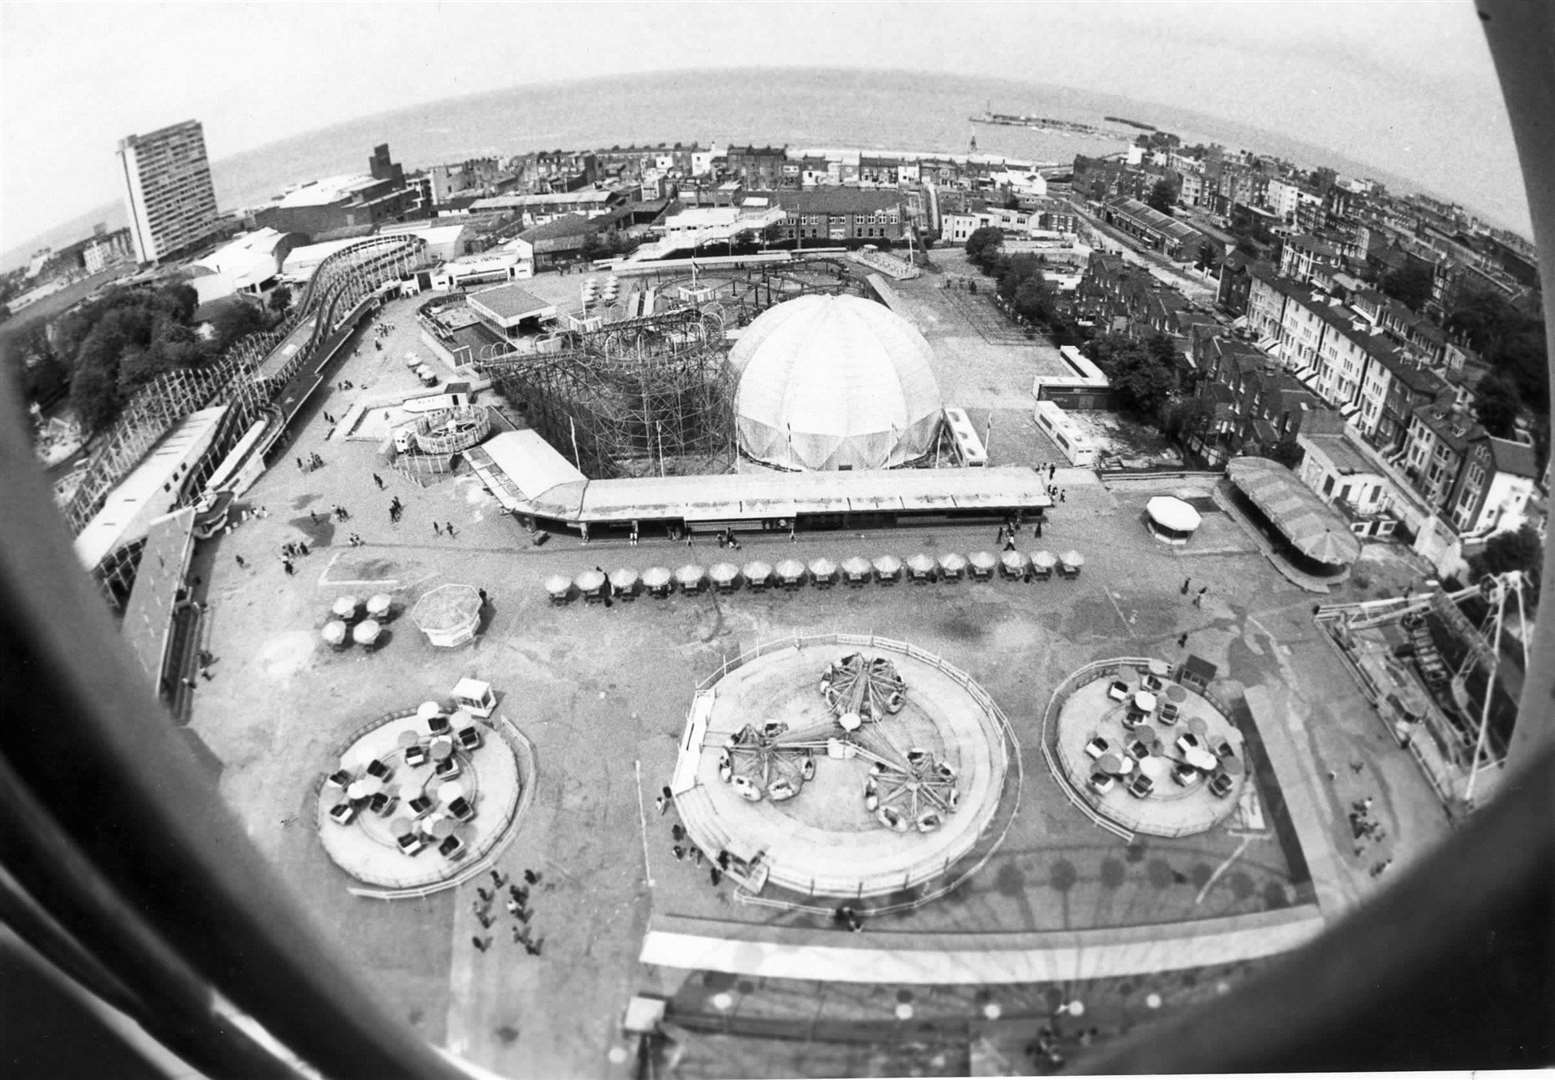 Bembom Brothers in 1983 - an aerial view overlooking the park of dreams